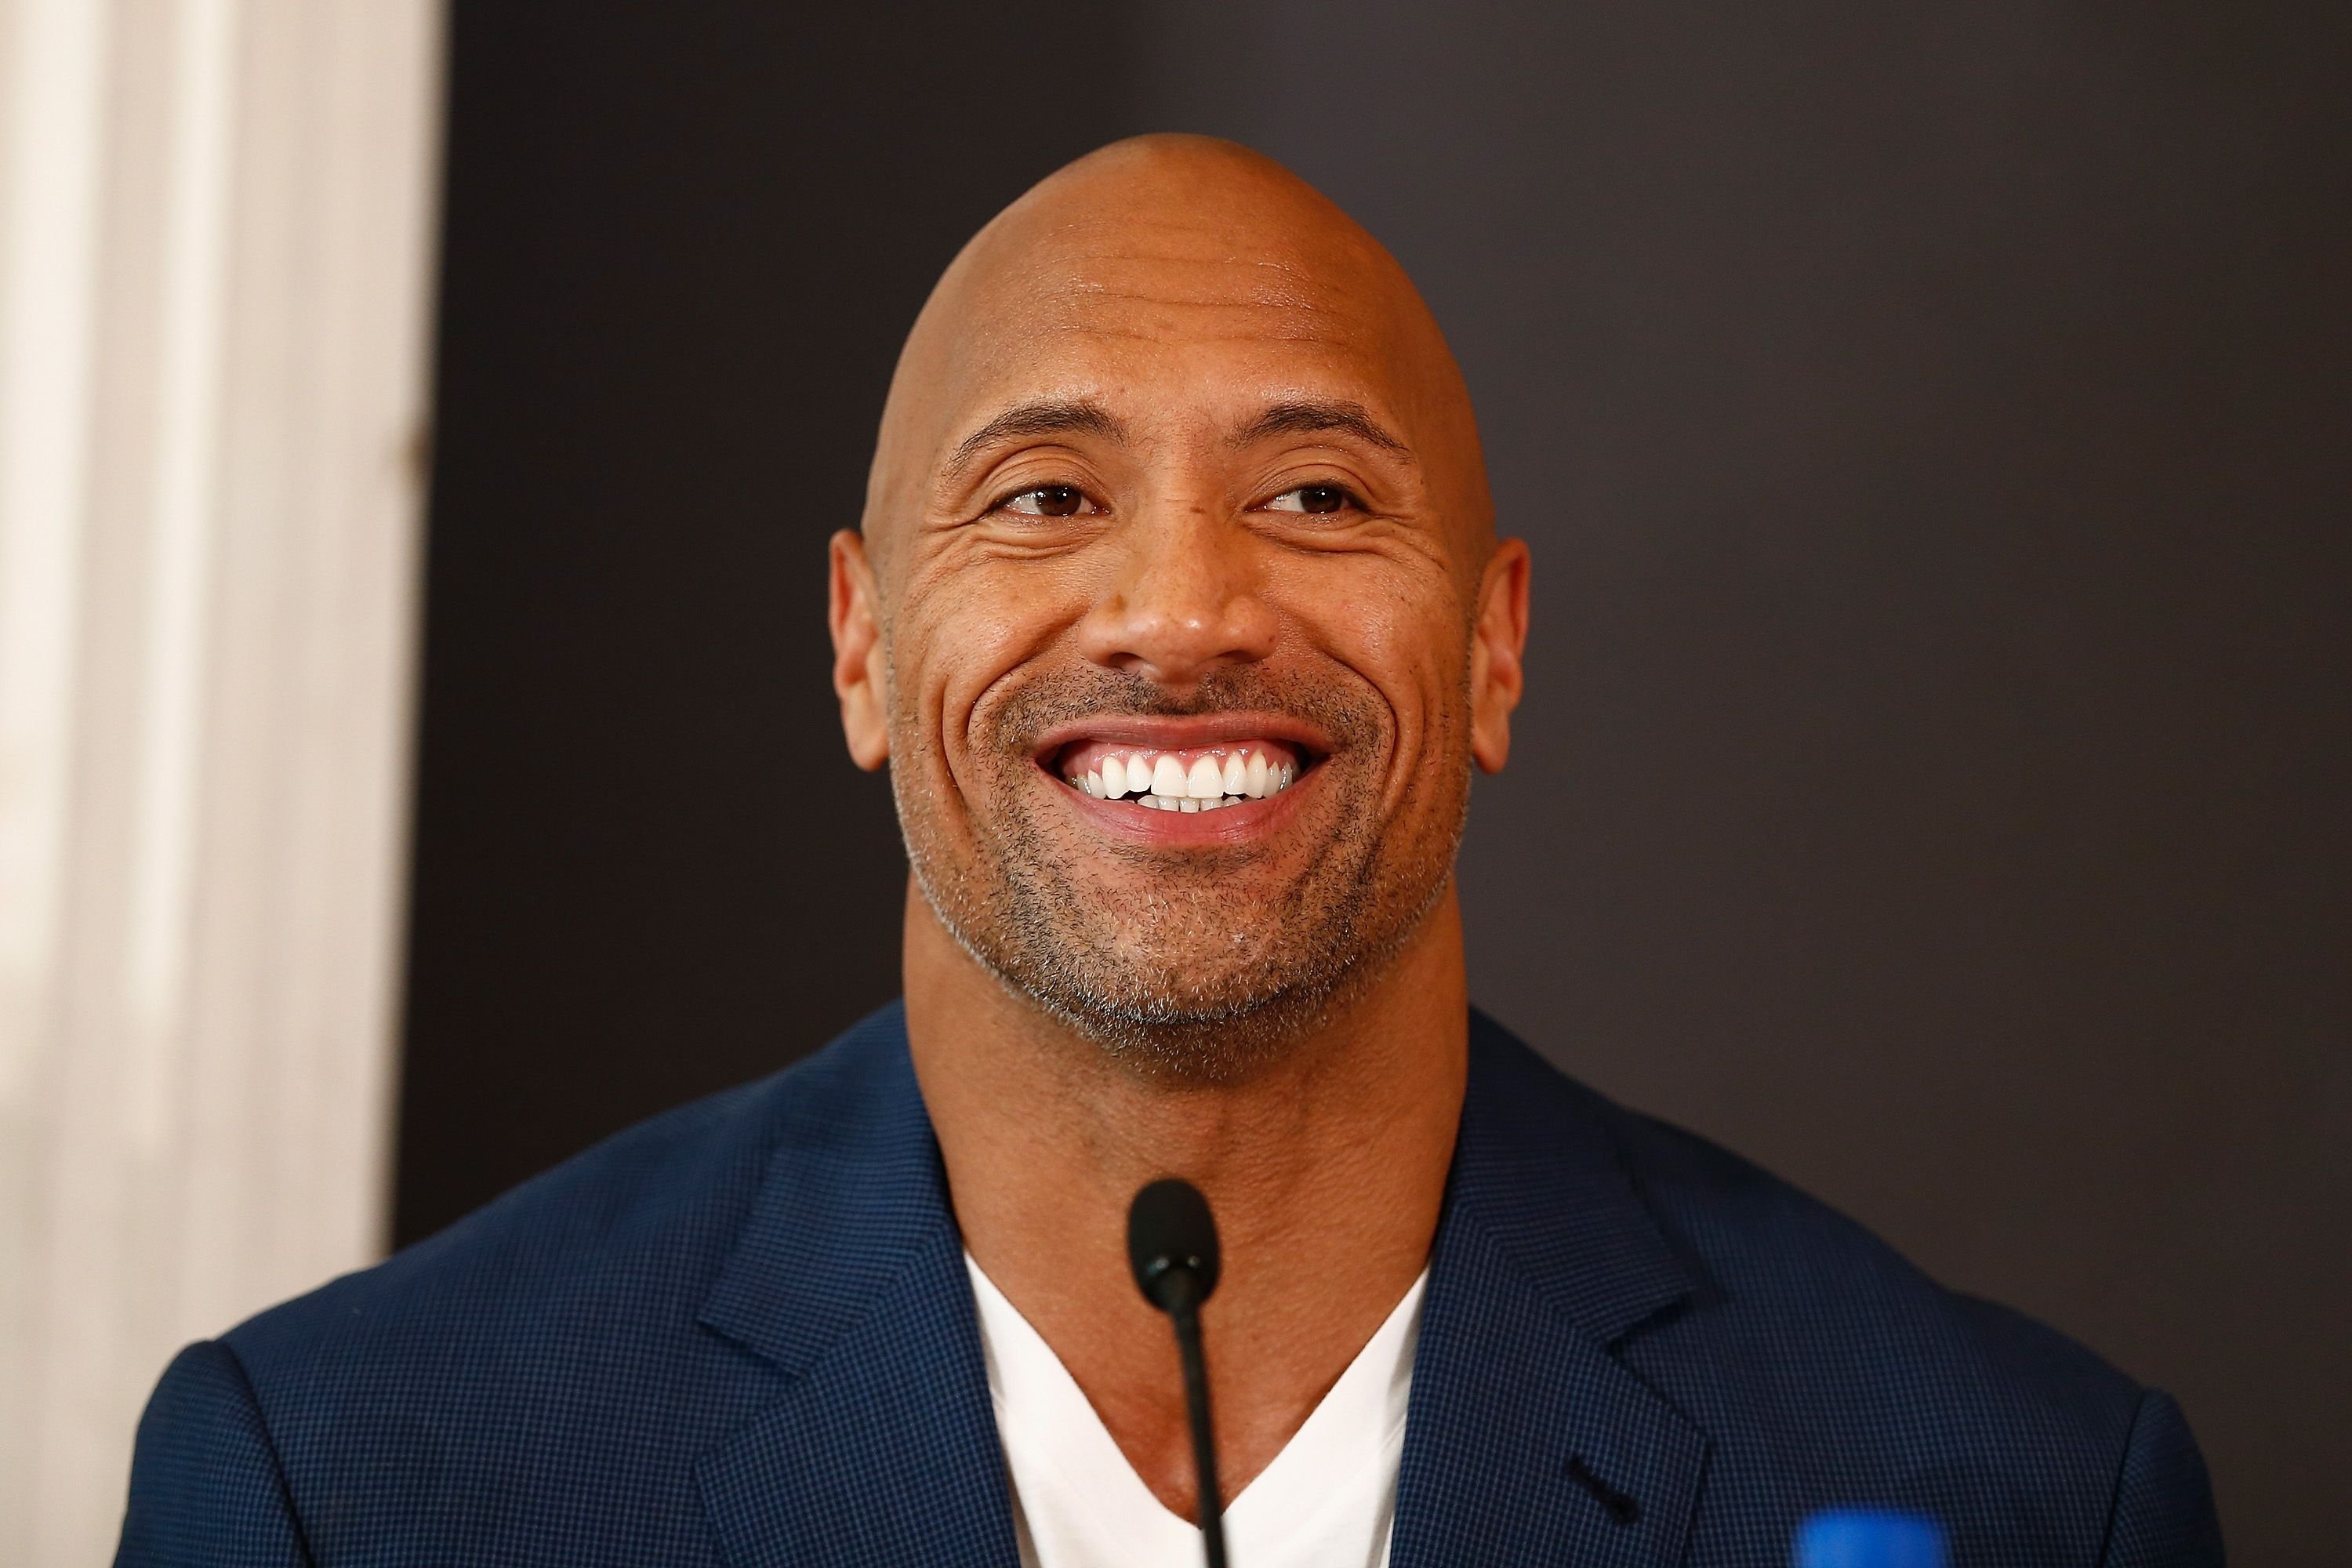 Dwayne Johnson at a press conference for 'Hercules' in 2014 in Berlin, Germany | Source: Getty Images